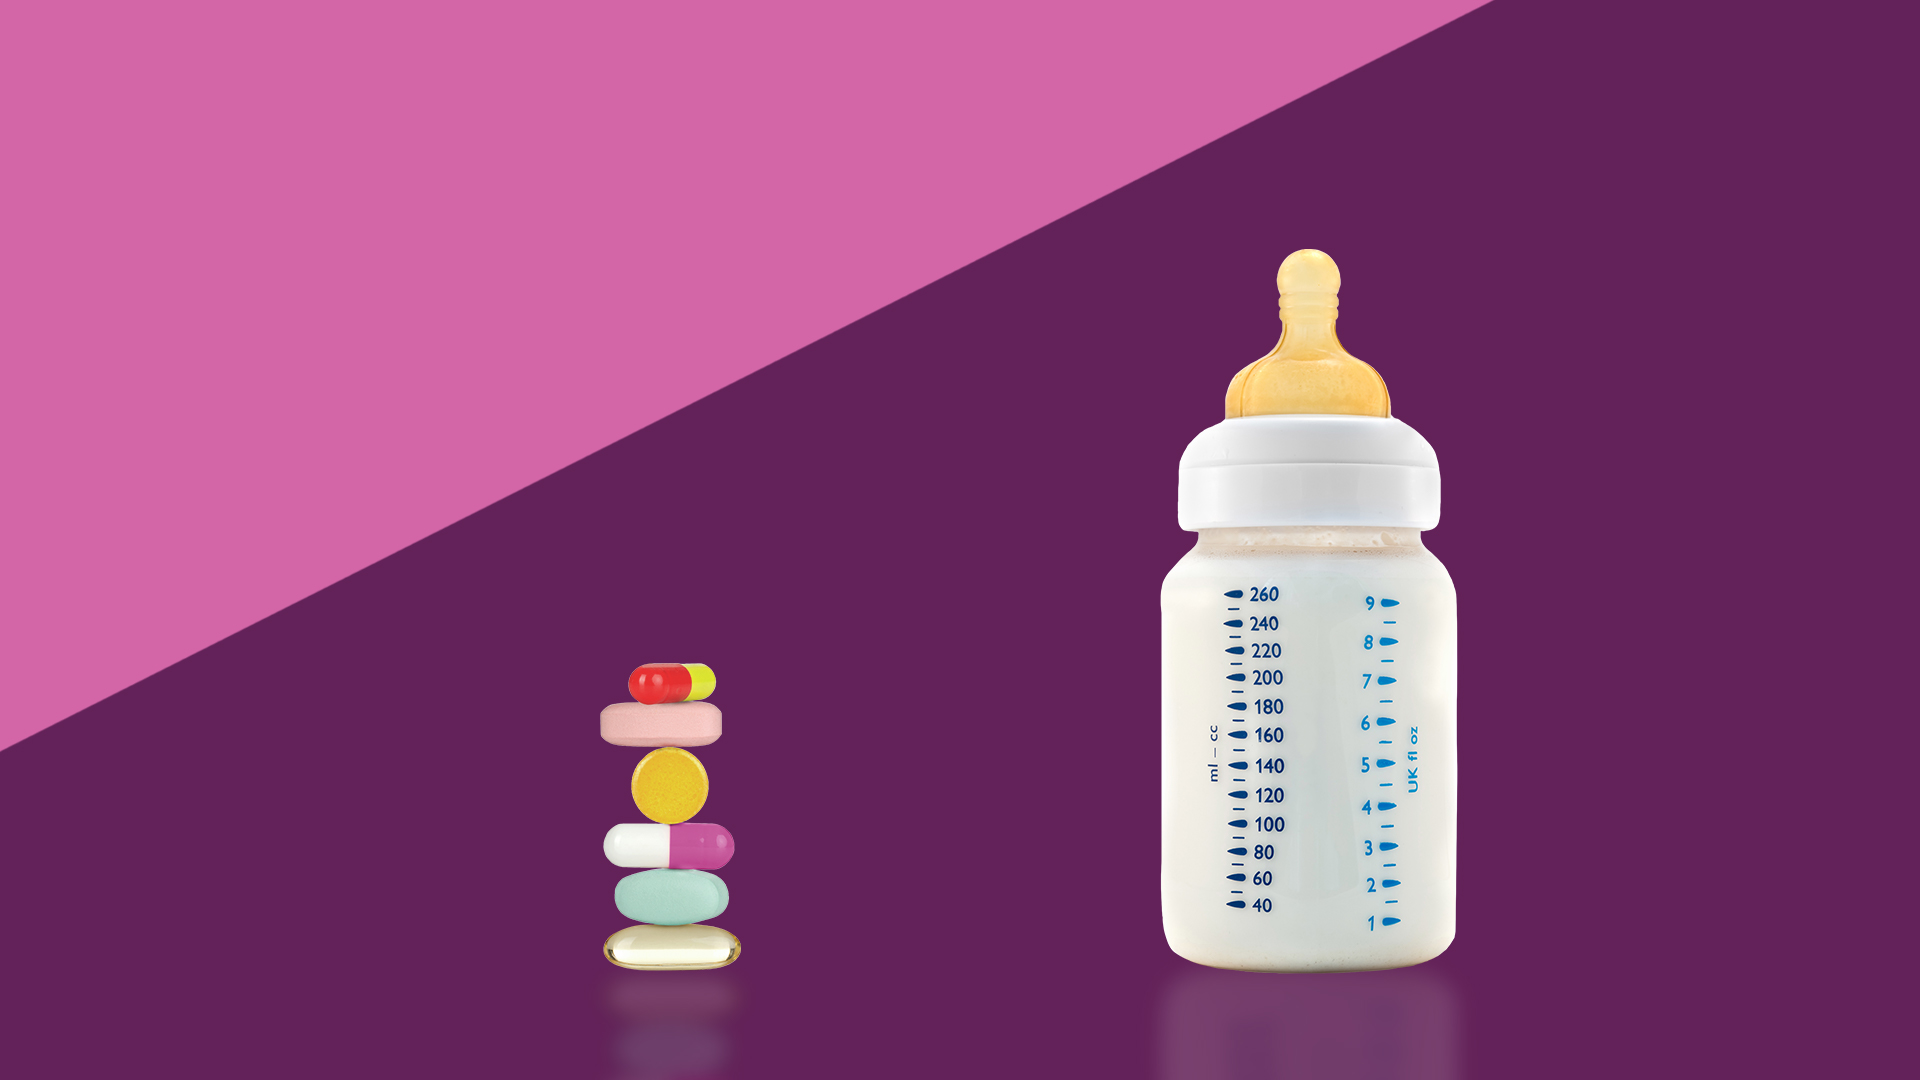 what medications affect breastfeeding